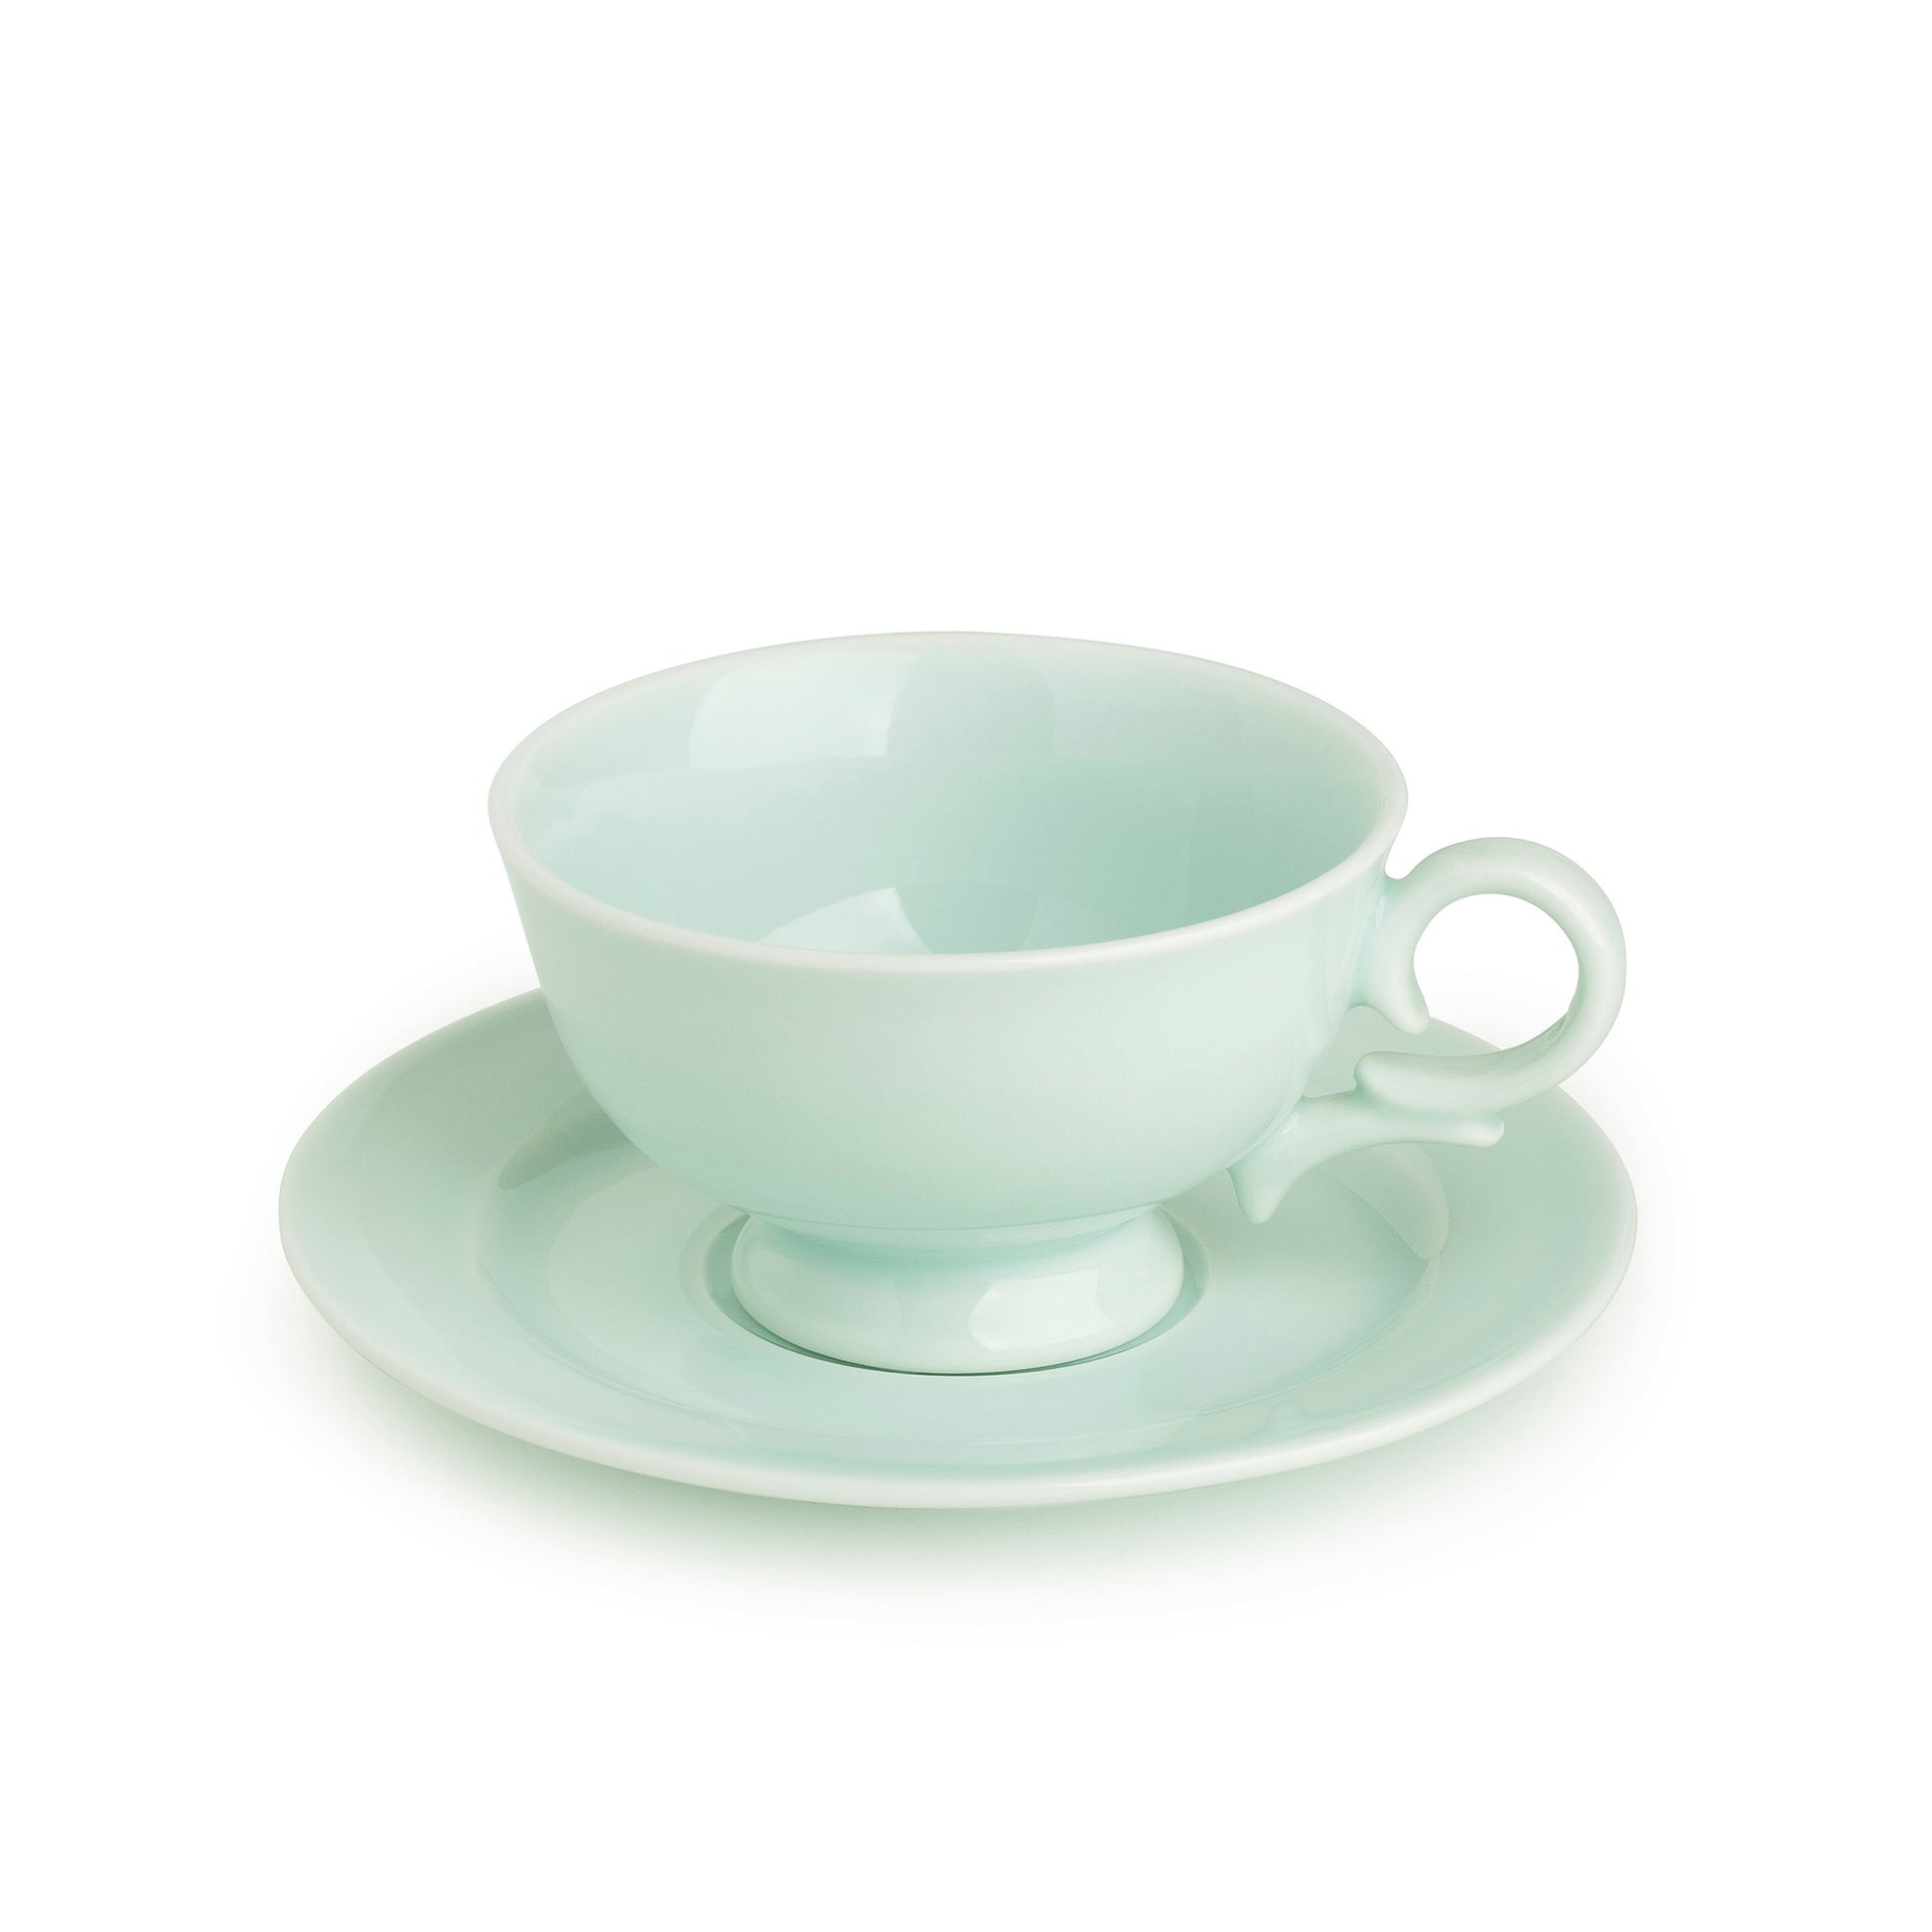 Green celadon porcelain coffee cup and saucer set, 30 degree angle view, media 1 of 4